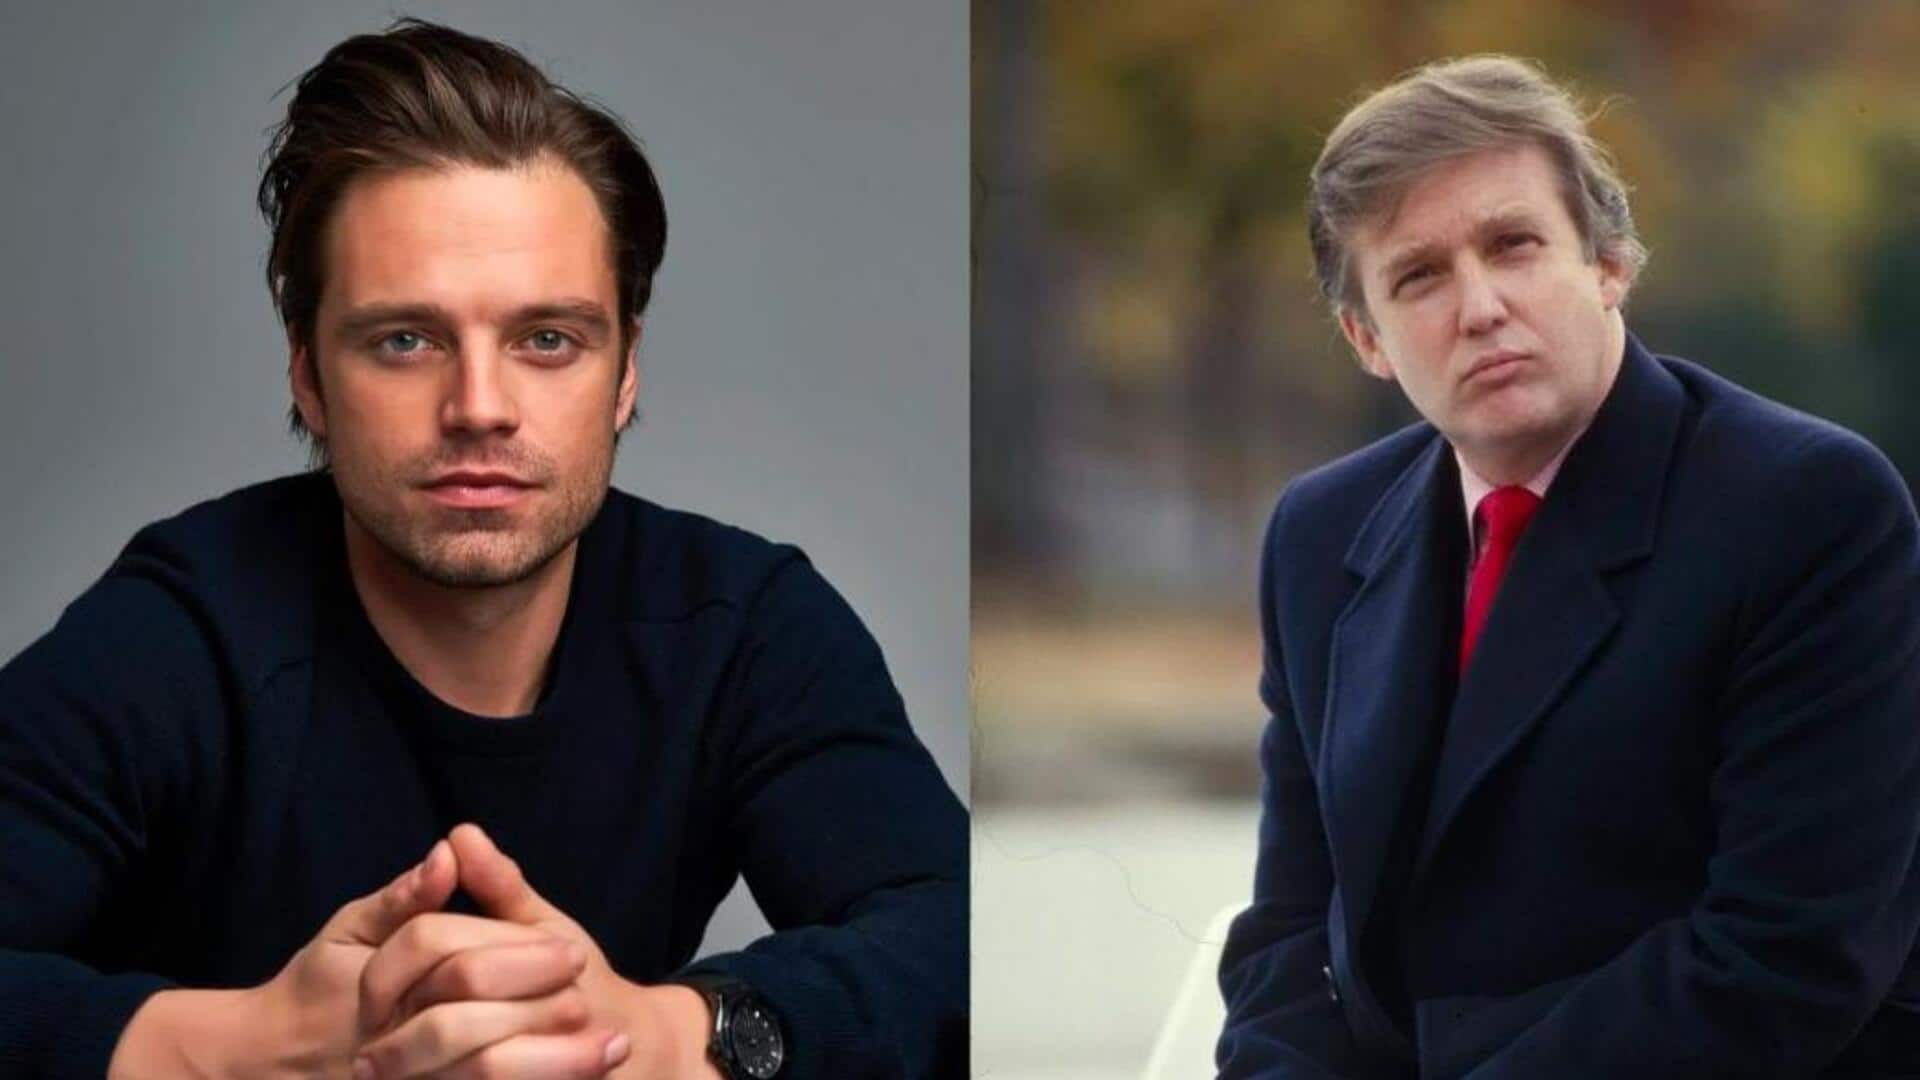 Who are the real figures getting featured in Trump's biopic